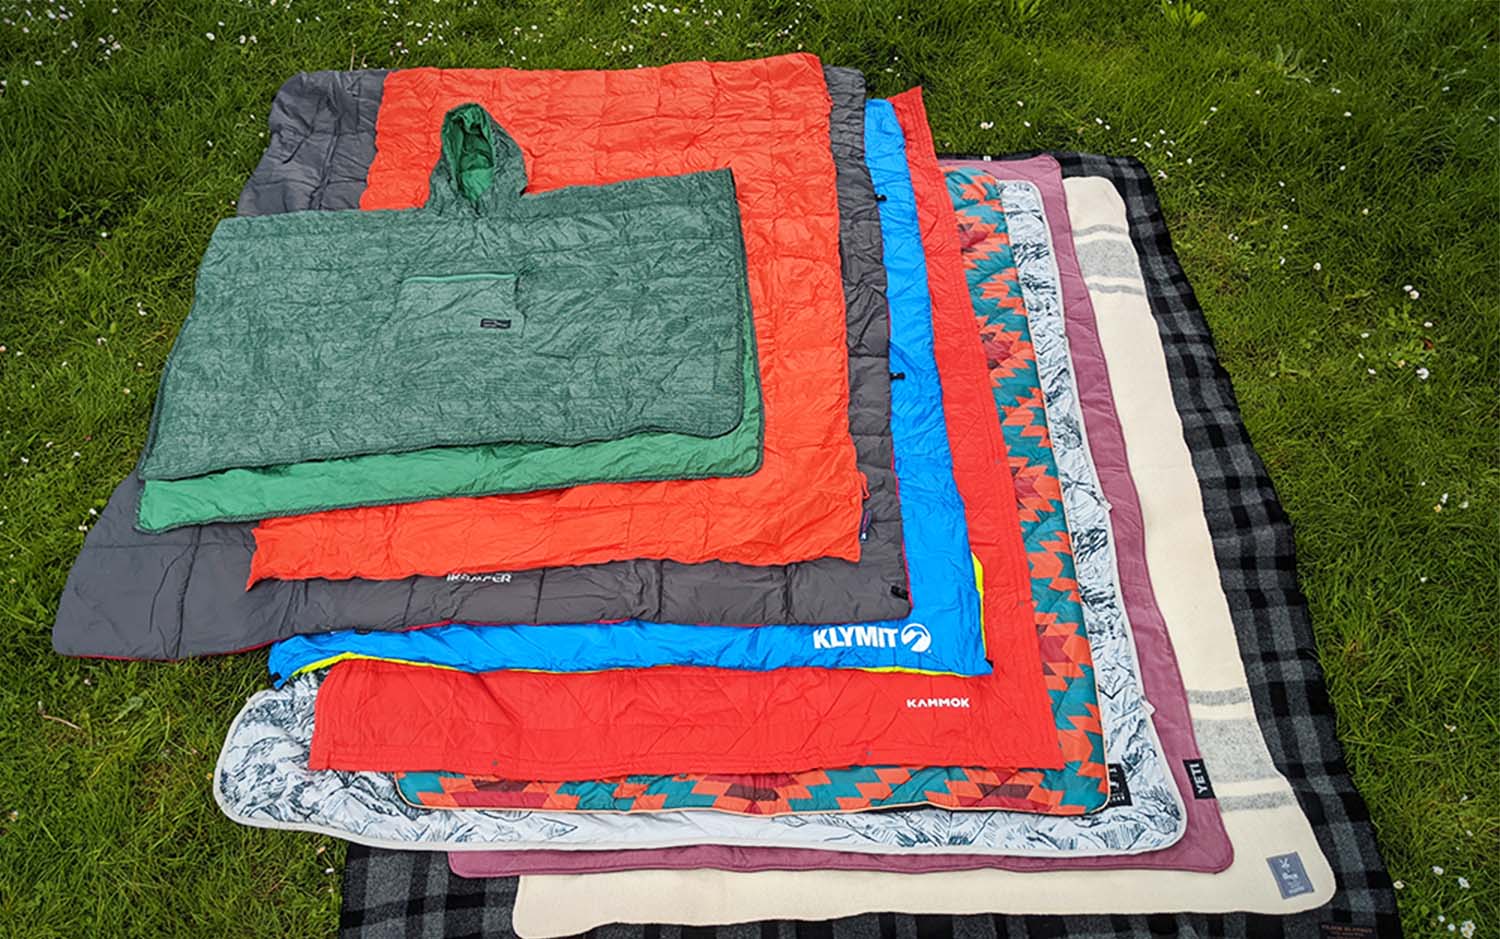 I, too, was surprised by just how many camping blankets there are on the market.